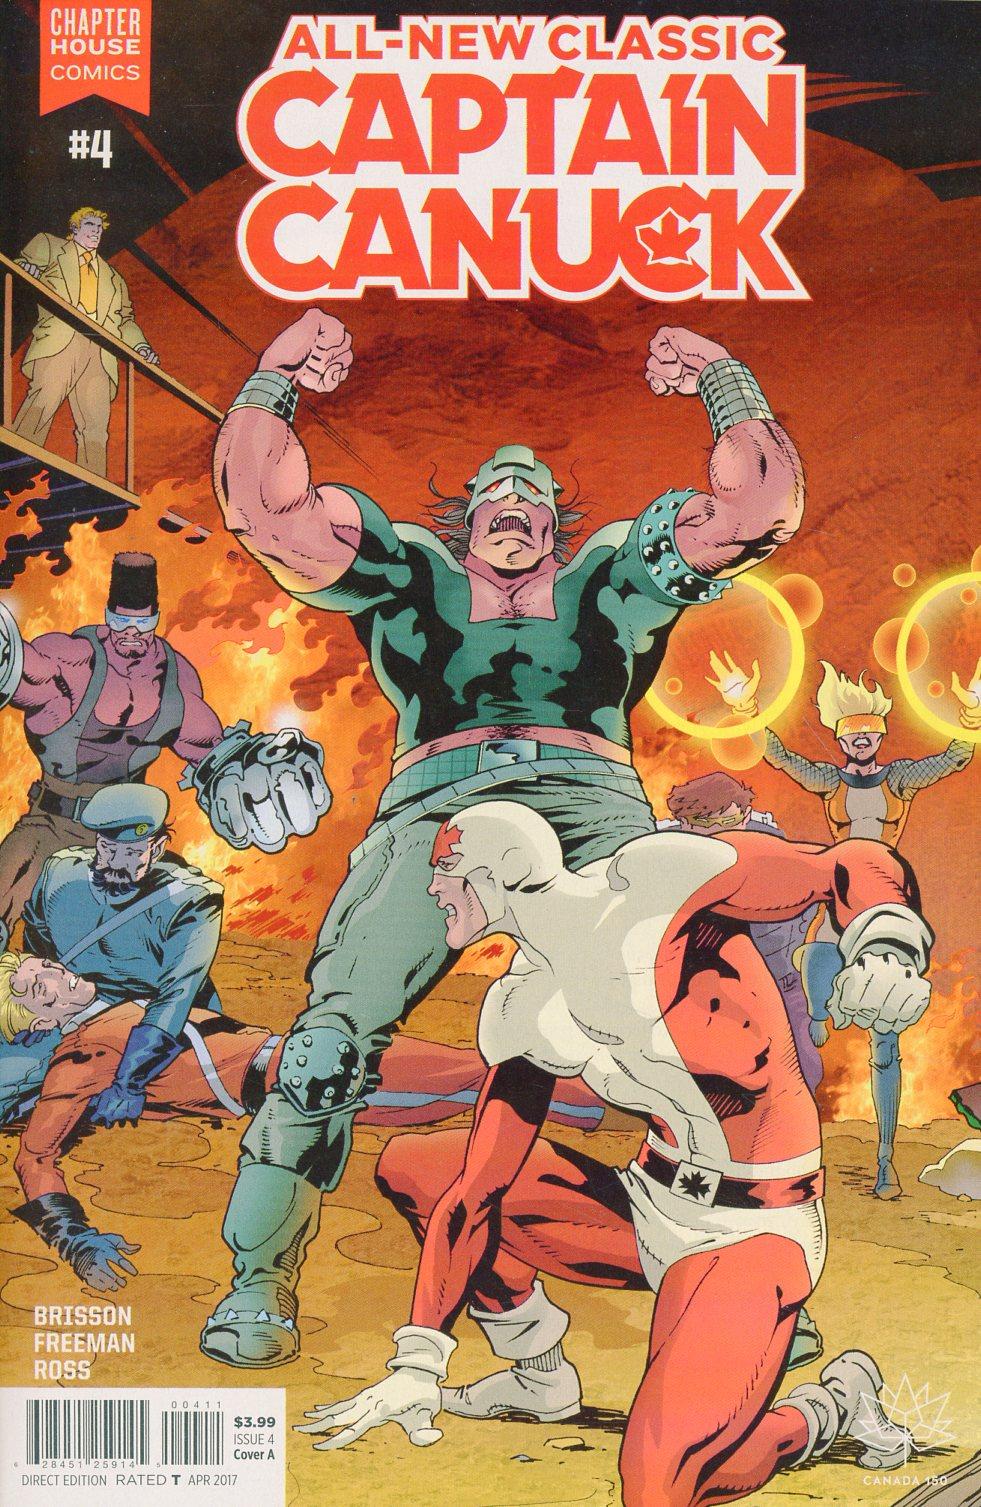 All-New Classic Captain Canuck Vol. 1 #4